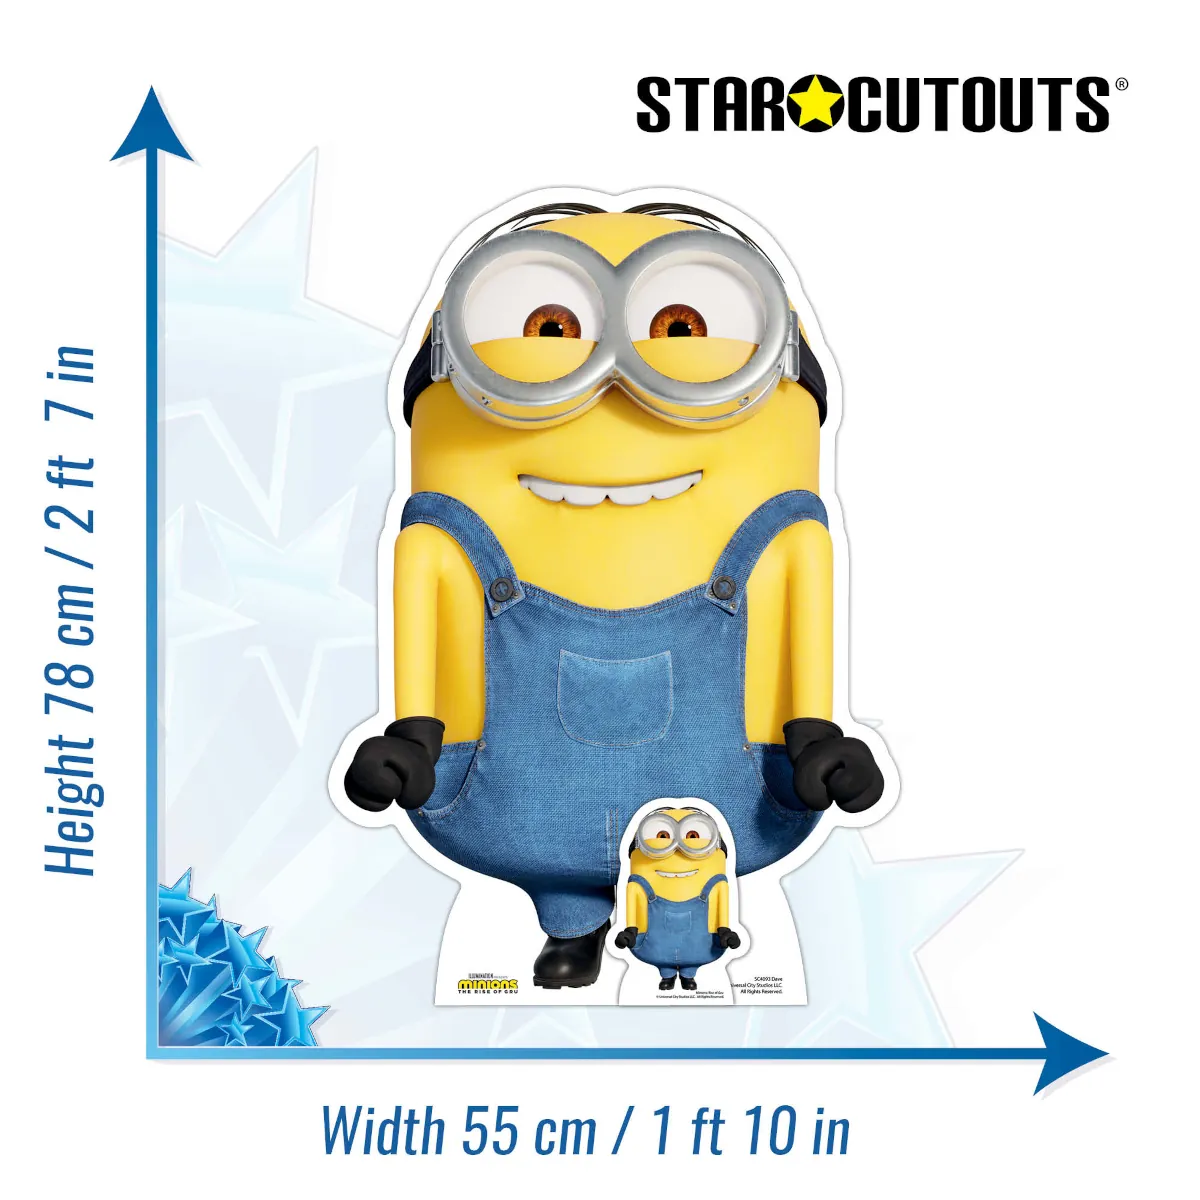 SC4093 Dave 'Excited' (Minions The Rise of Gru) Official Large + Mini Cardboard Cutout Standee Size